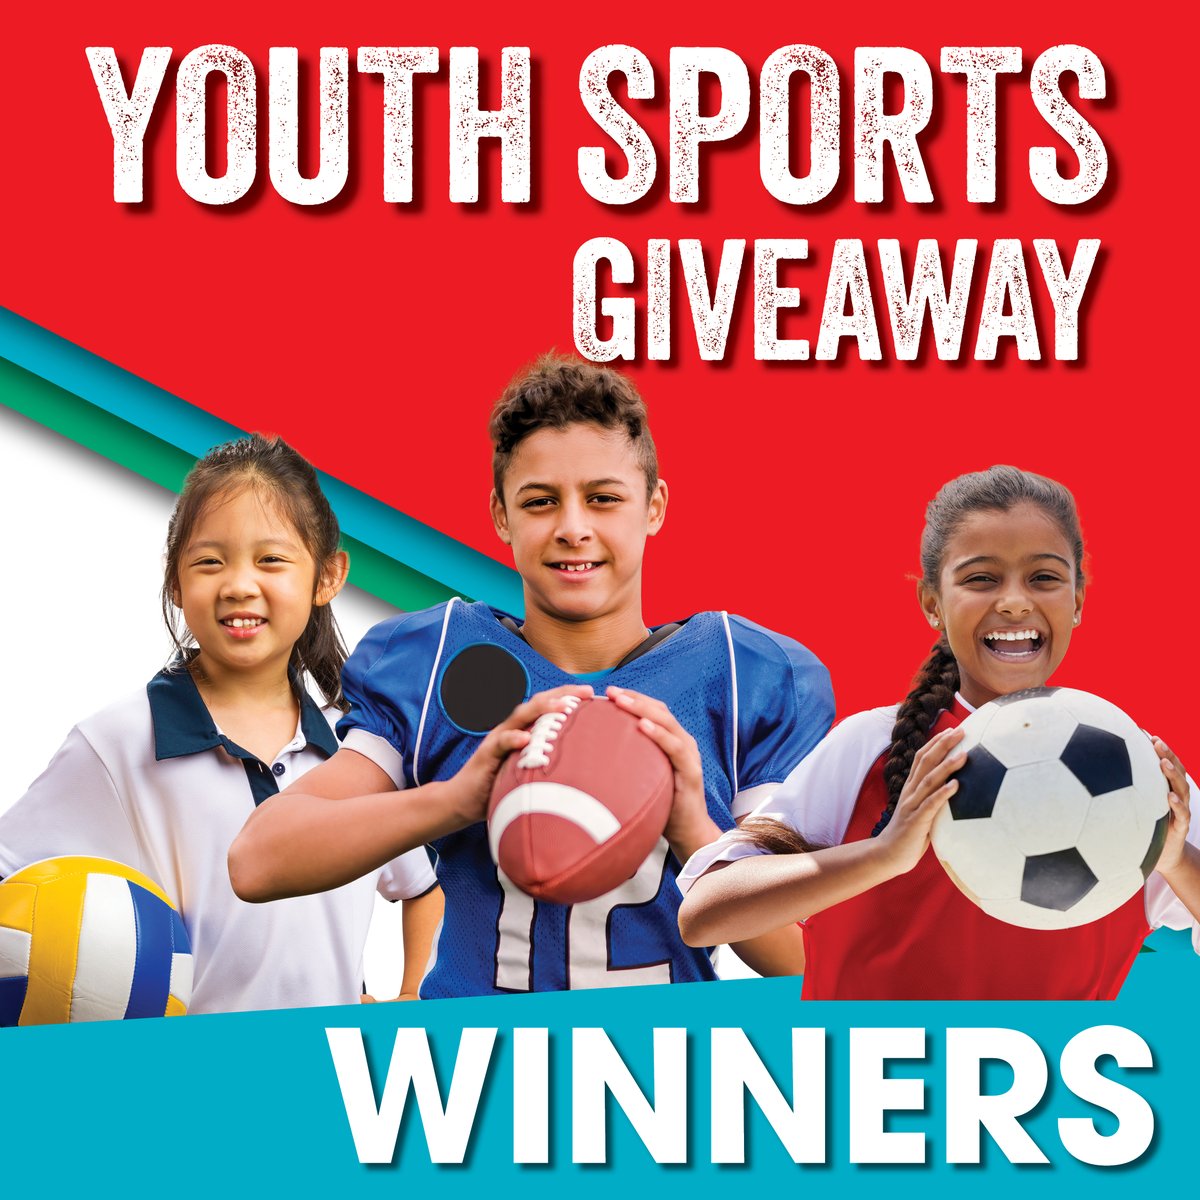 Rutter's Children's Charities donated $1,000 each to 50 different Youth Sports Leagues! To see the full list of winners, go to rutterschildrenscharities.org

#RuttersChildrensCharities #Donation #YouthSports #Giveaway